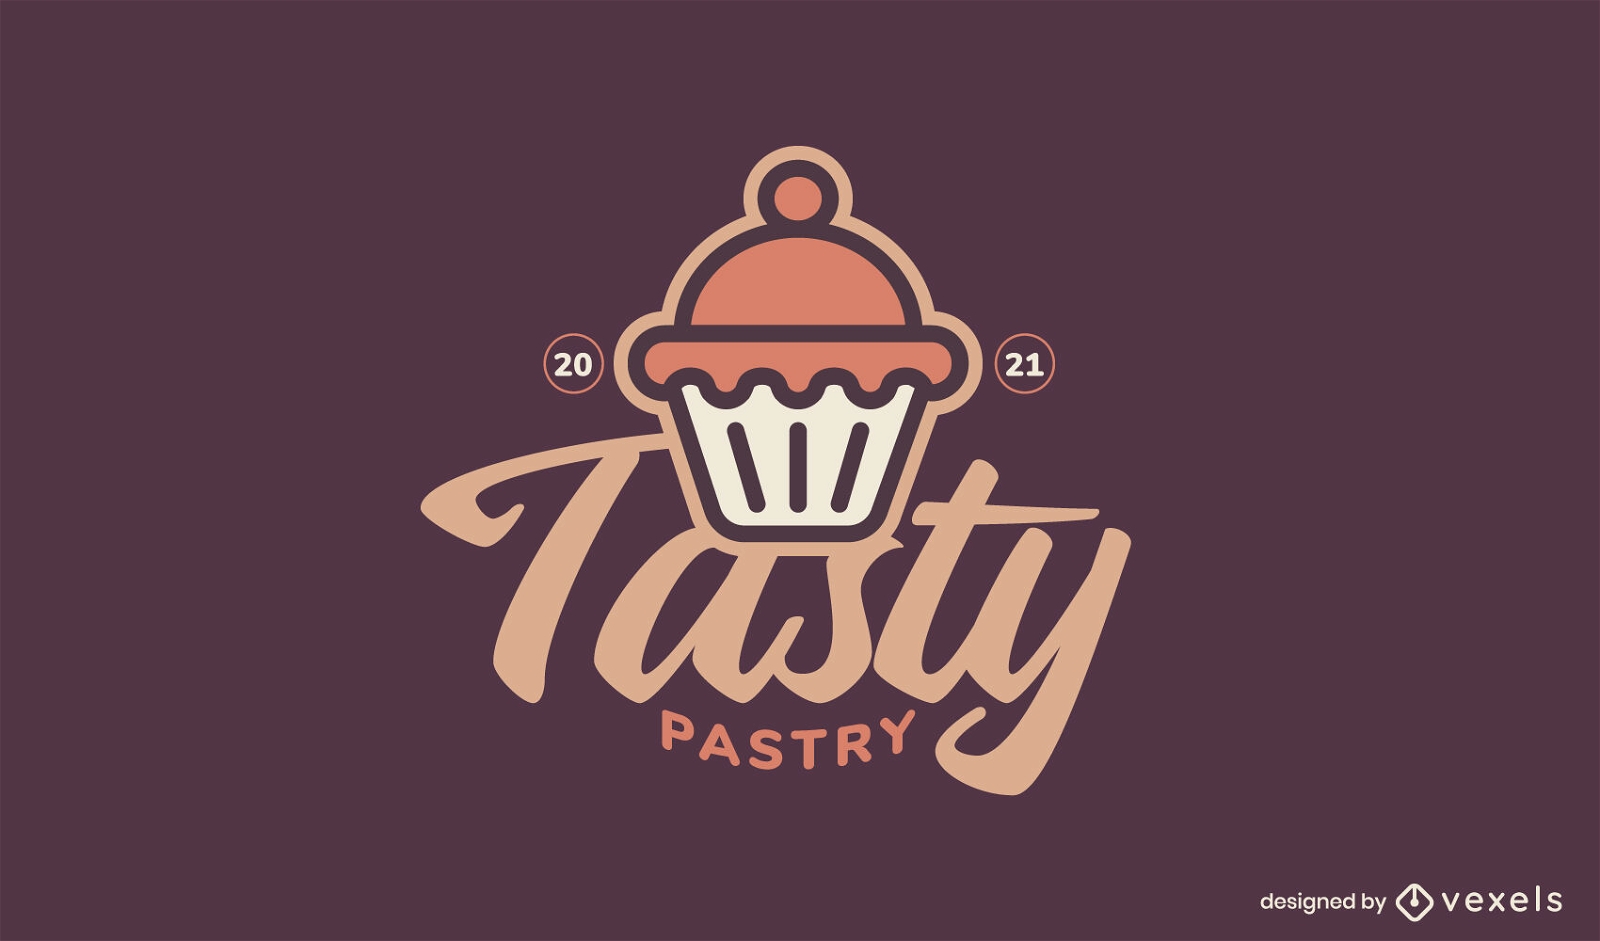 How to design a food truck logo [EASY TUTORIAL] - YouTube